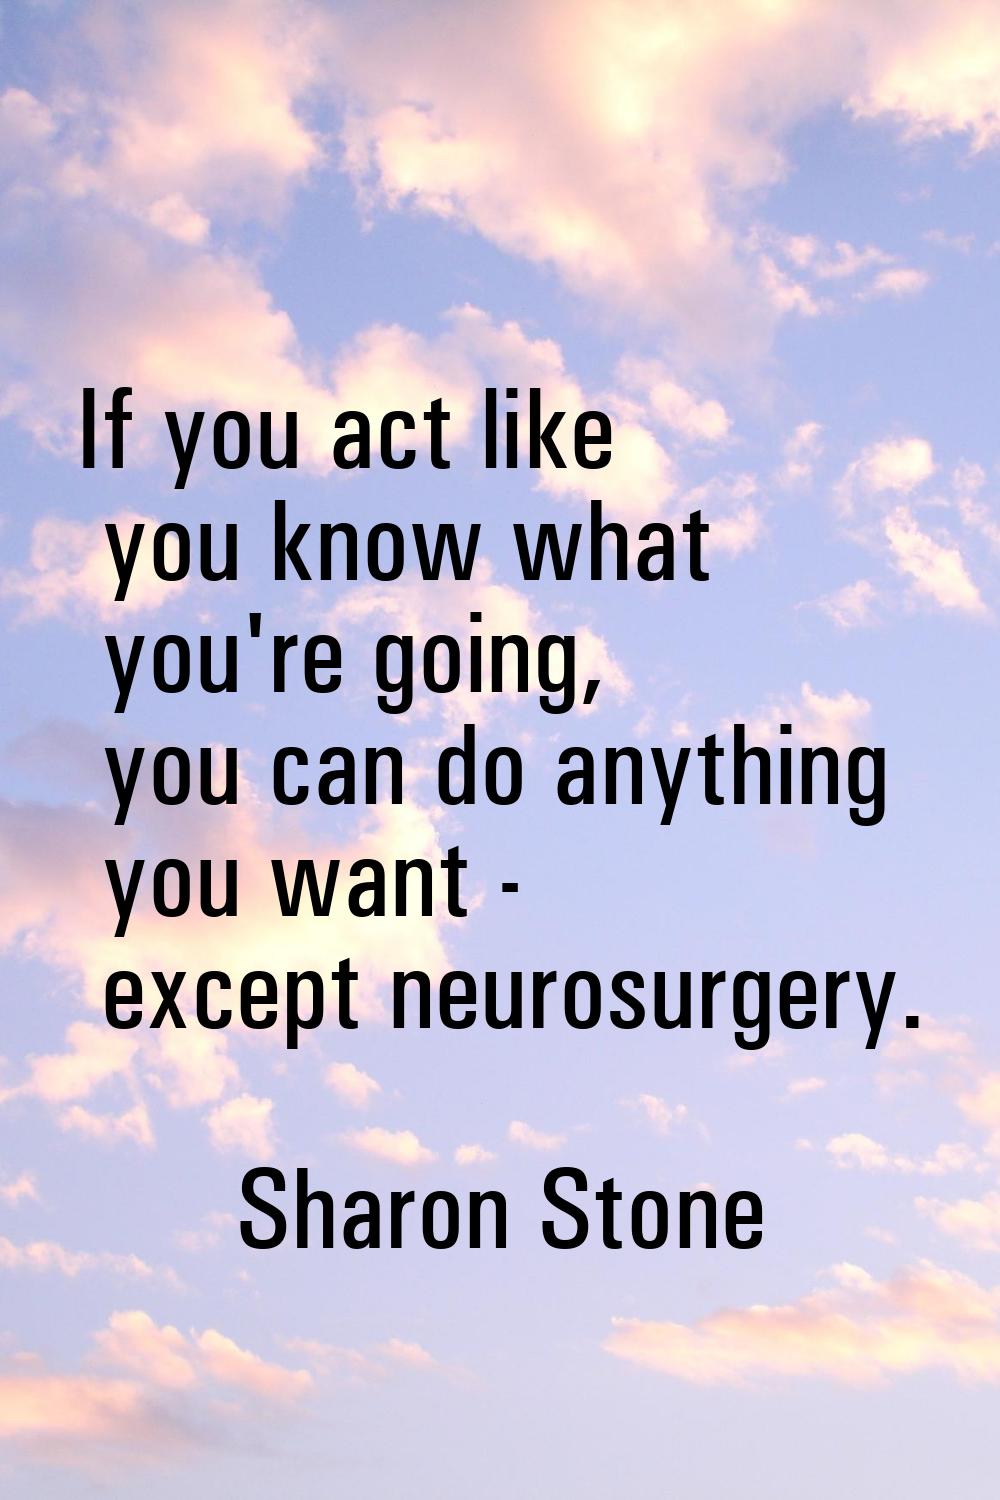 If you act like you know what you're going, you can do anything you want - except neurosurgery.